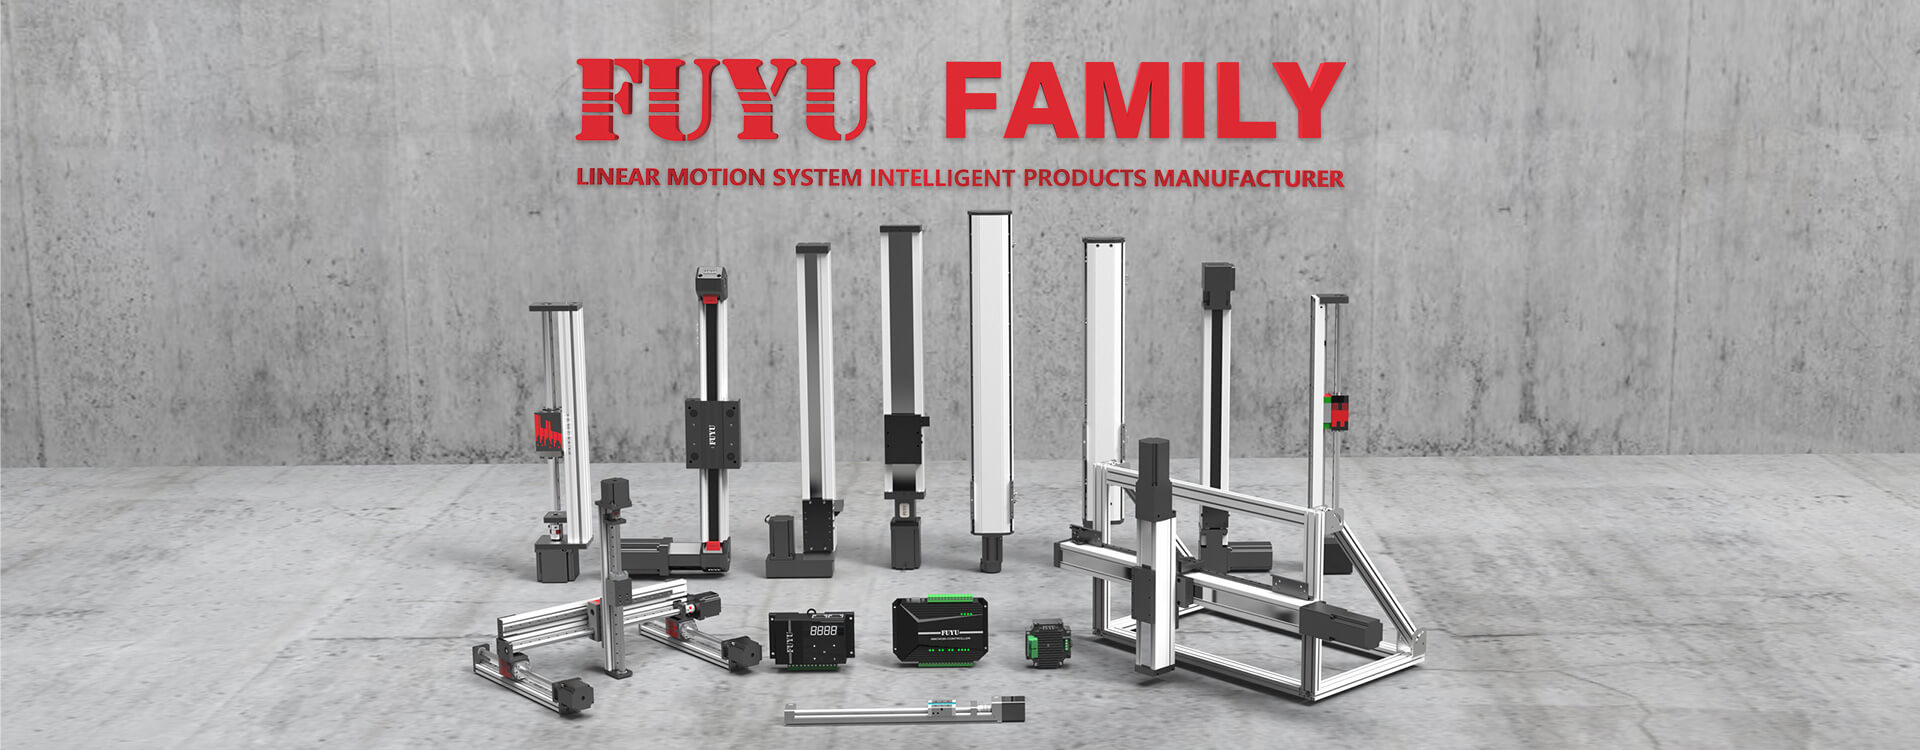 https://cdnus.globalalso.com/fuyumotion/linear-positioning-system-for-pick-and-place.jpg